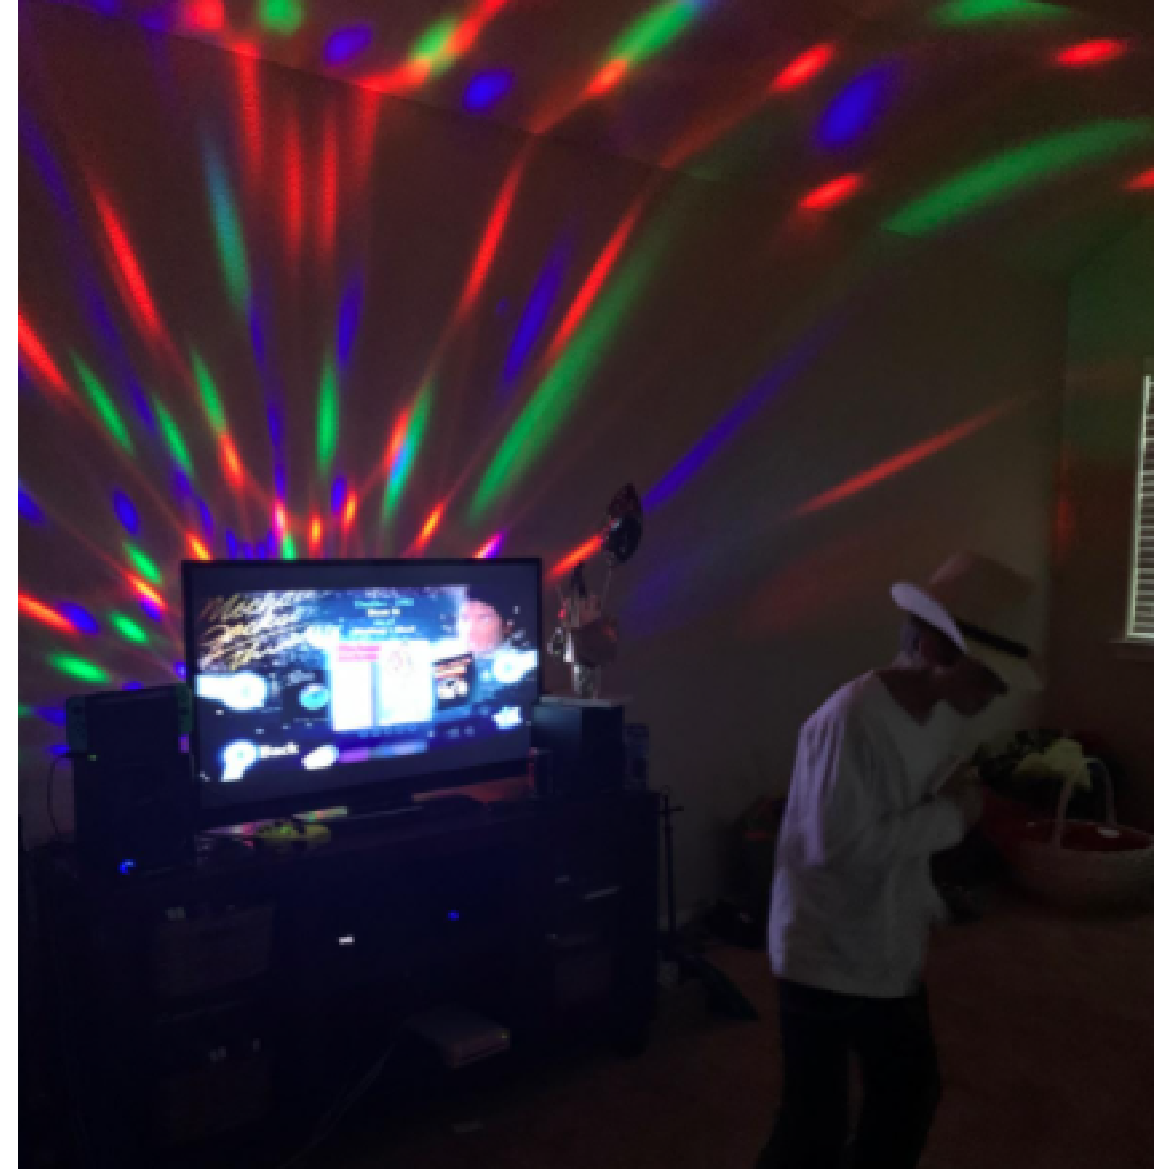 Cake and Party Decoration - Party Lights Laser Lights DJ Lights – Rampant  Cake & Party